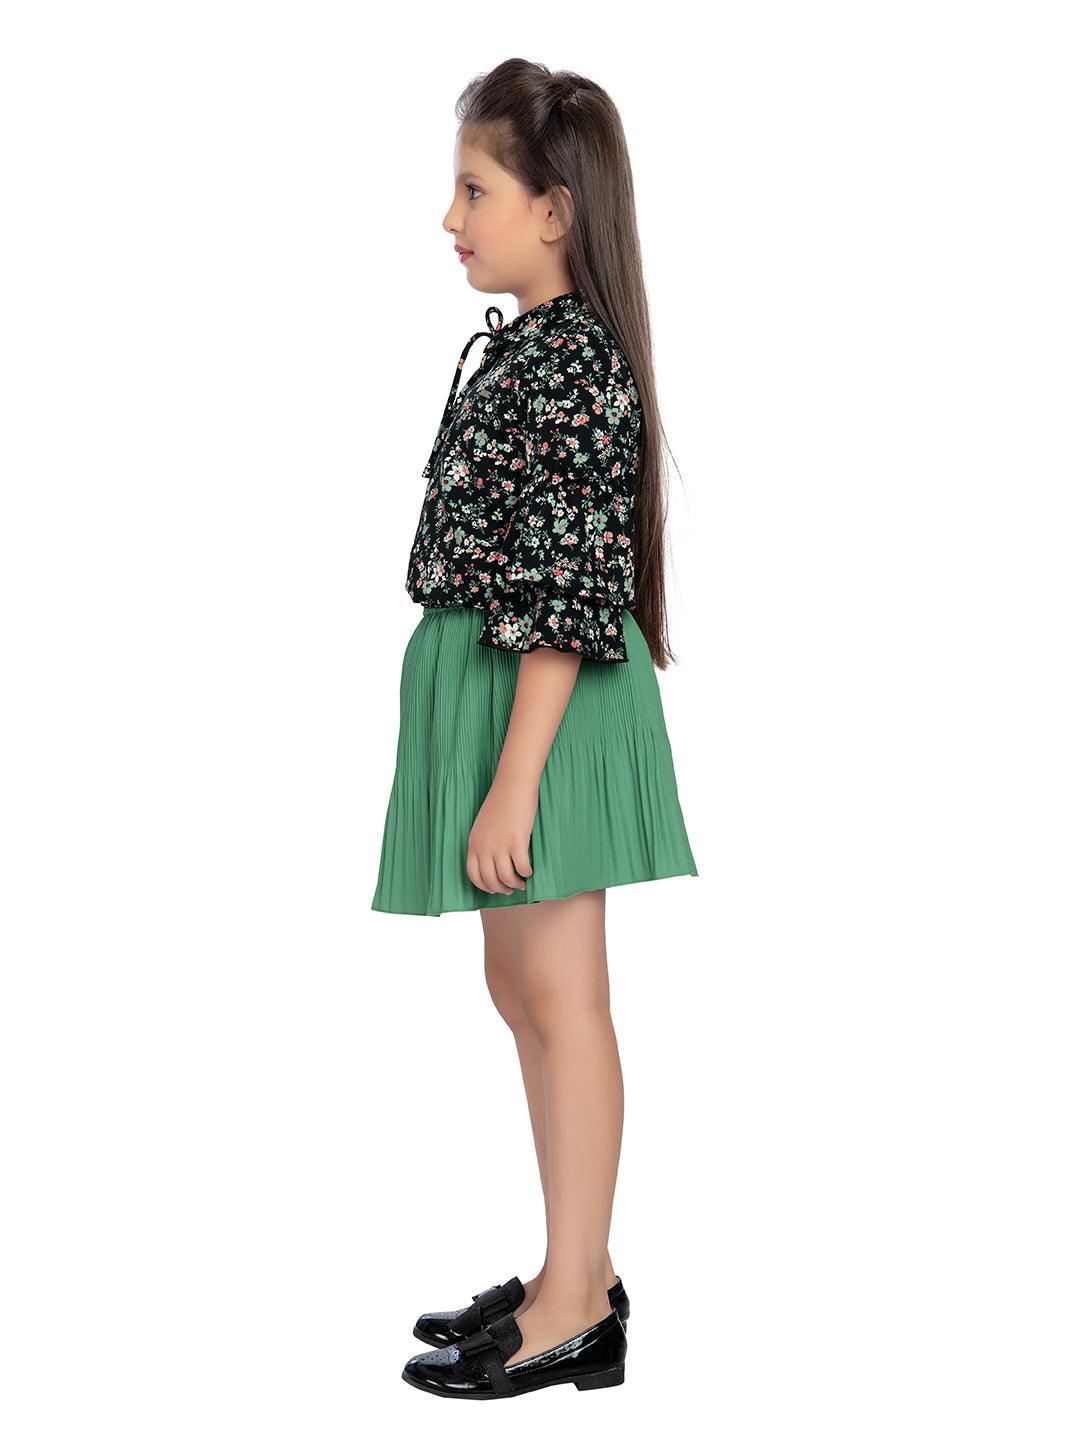 Tiny Baby Green Colored Skirt Top Set - 2118 Green - TINY BABY INDIA shop.tinybaby.in